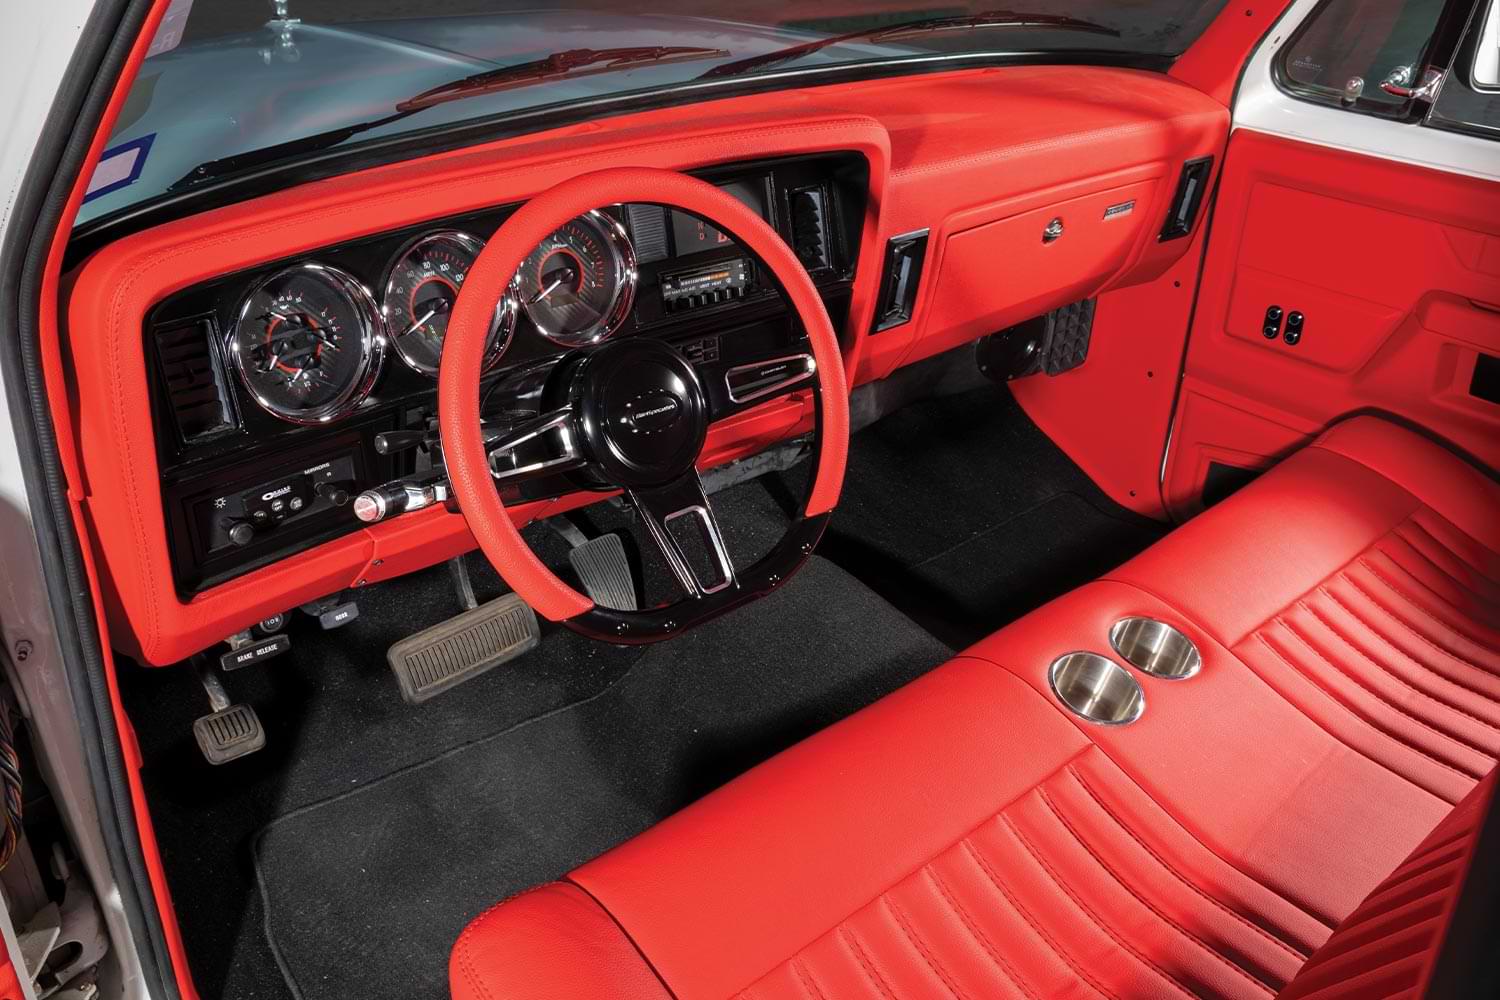 driver's side interior view of the ’89 Dodge Ram D150 featuring vibrant red leather seating and lining